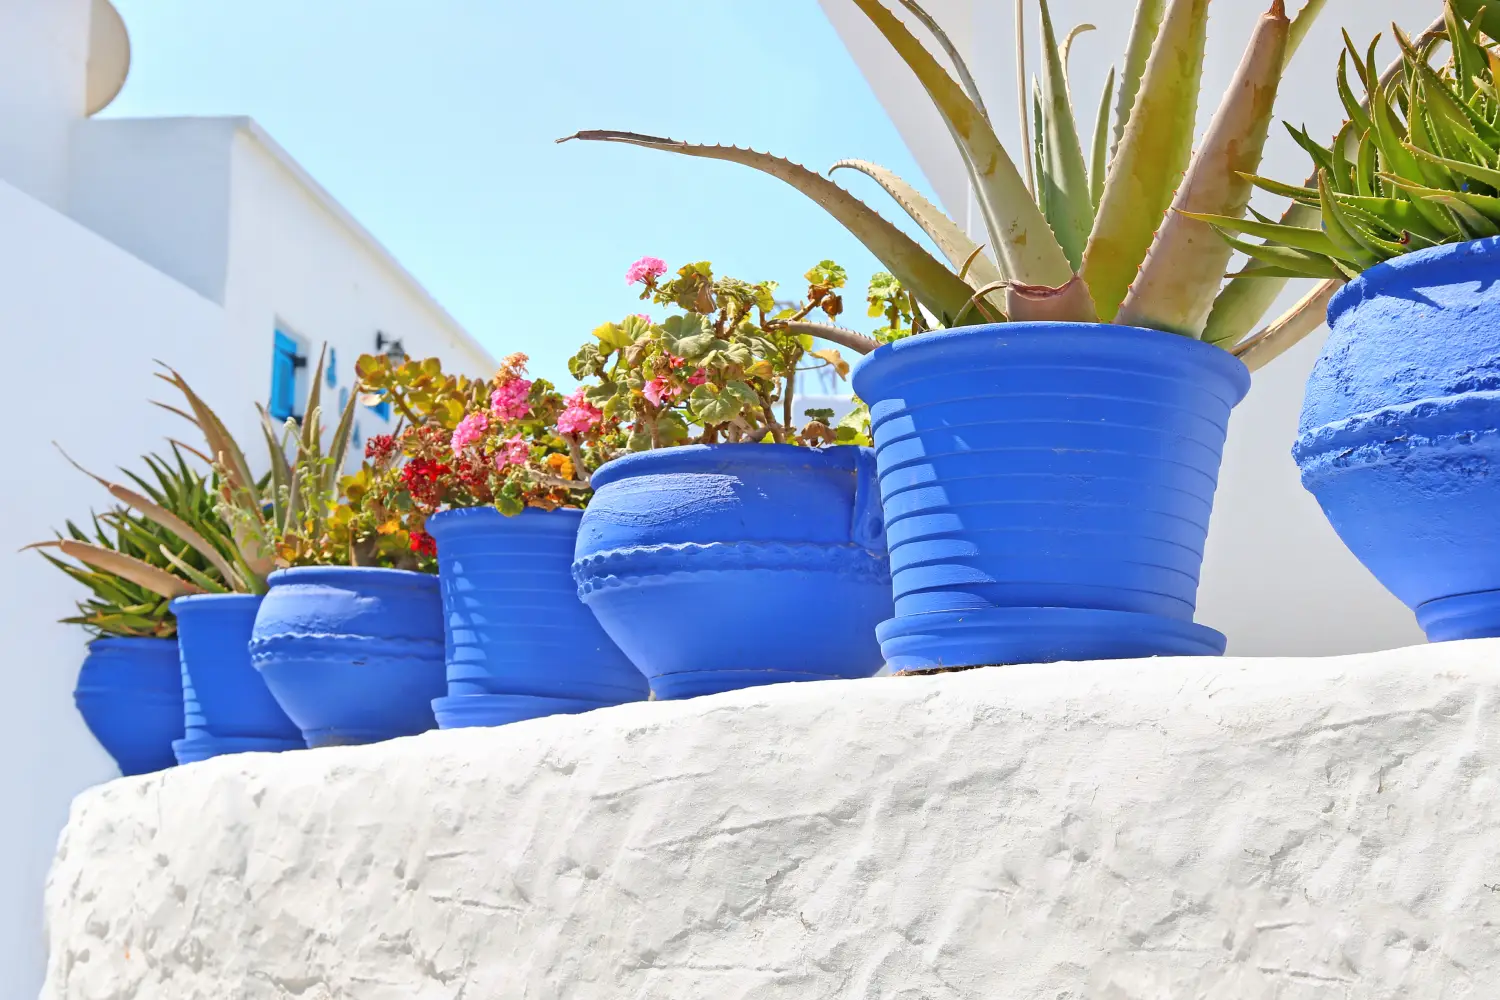 Ferry to Koufonisi - Blue flower pots at Ano Koufonisi island, Cyclades, Greece.